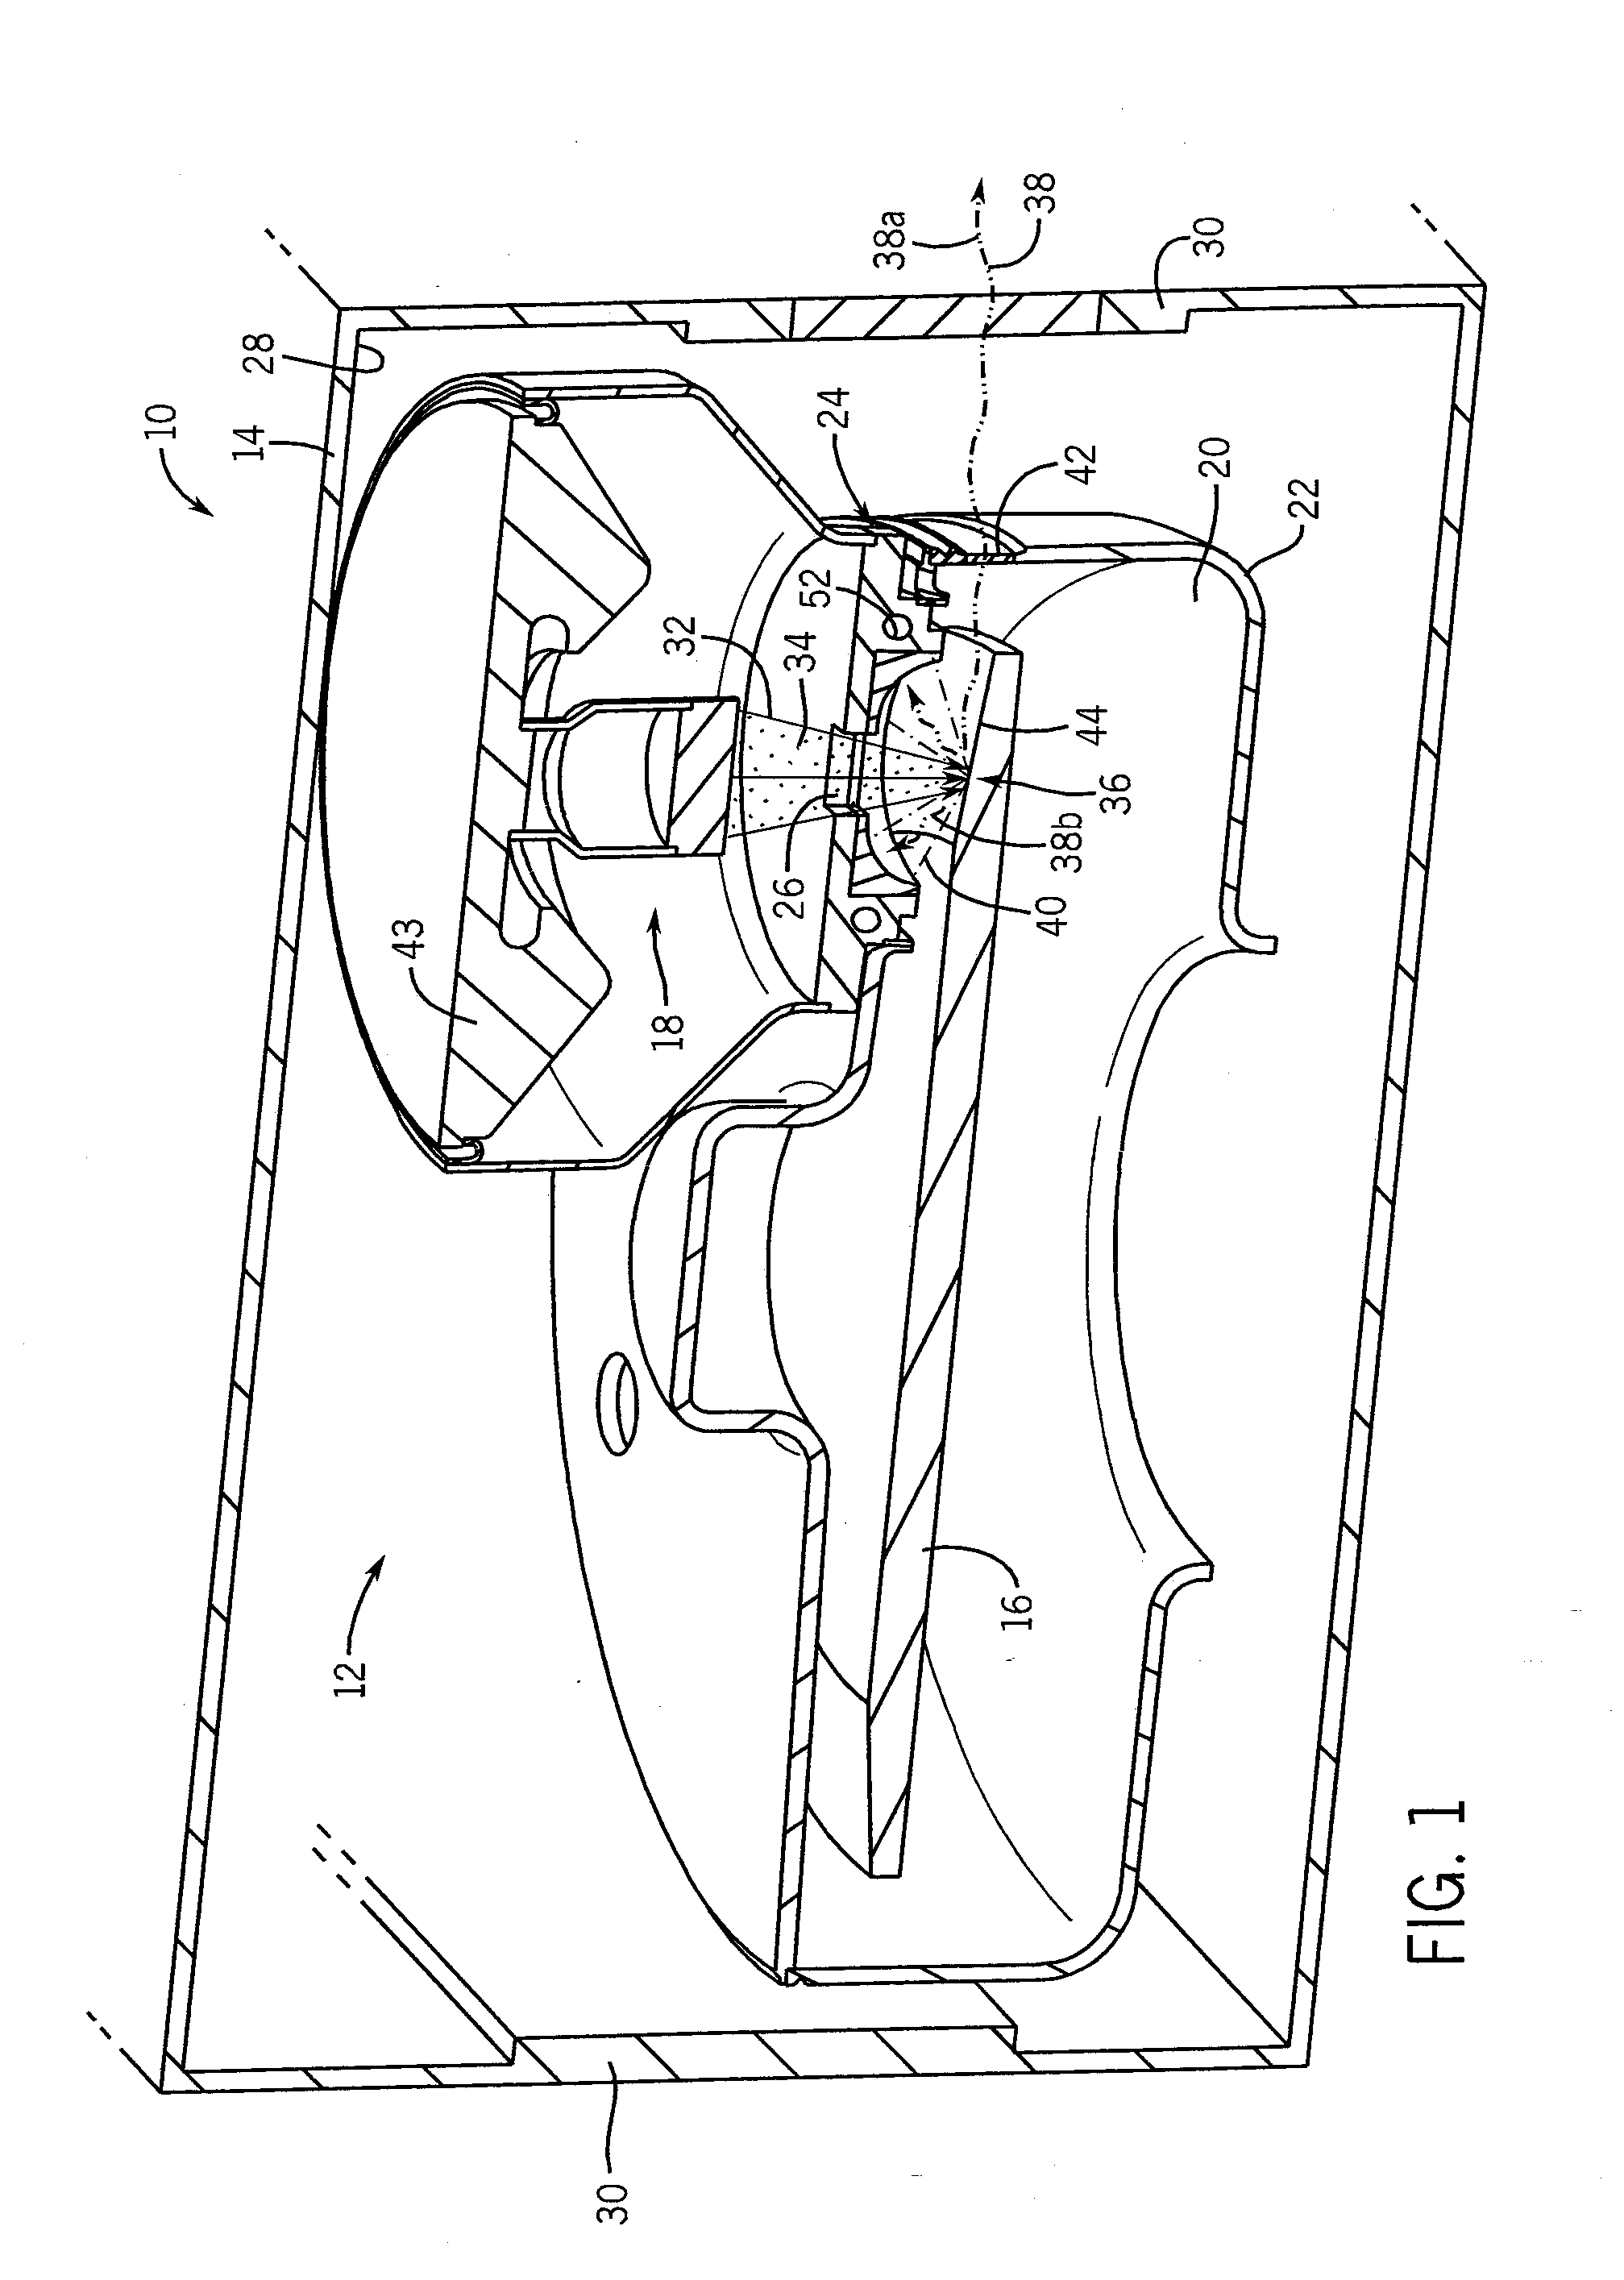 Electron absorption apparatus for an x-ray device